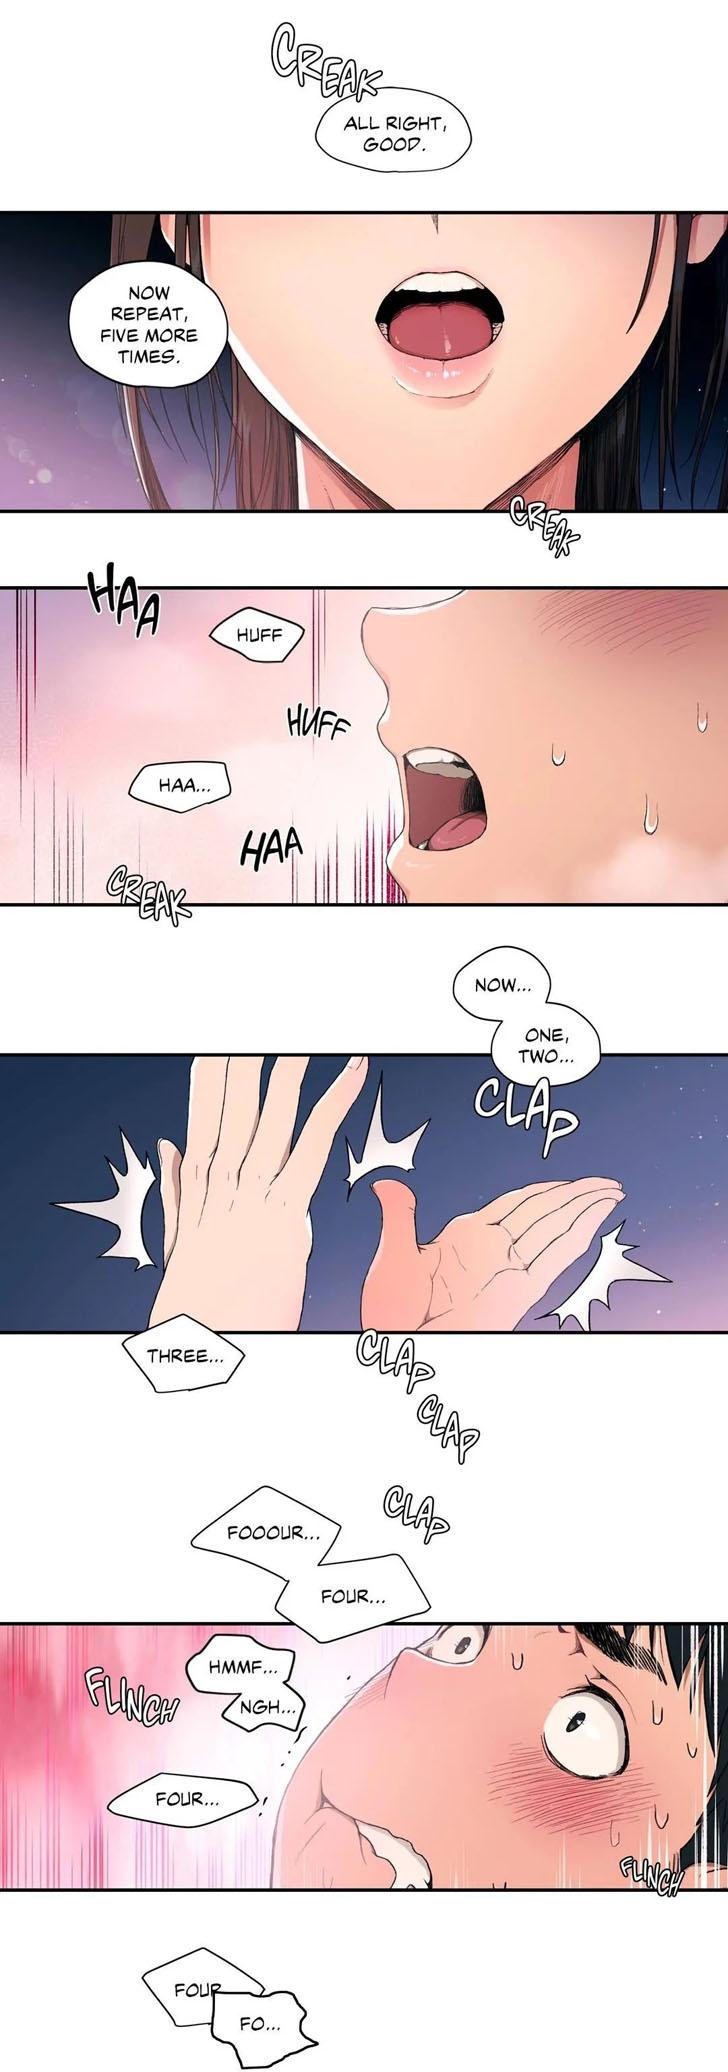 Softcore Sexercise Ch.17/? Free Blow Job - Page 2